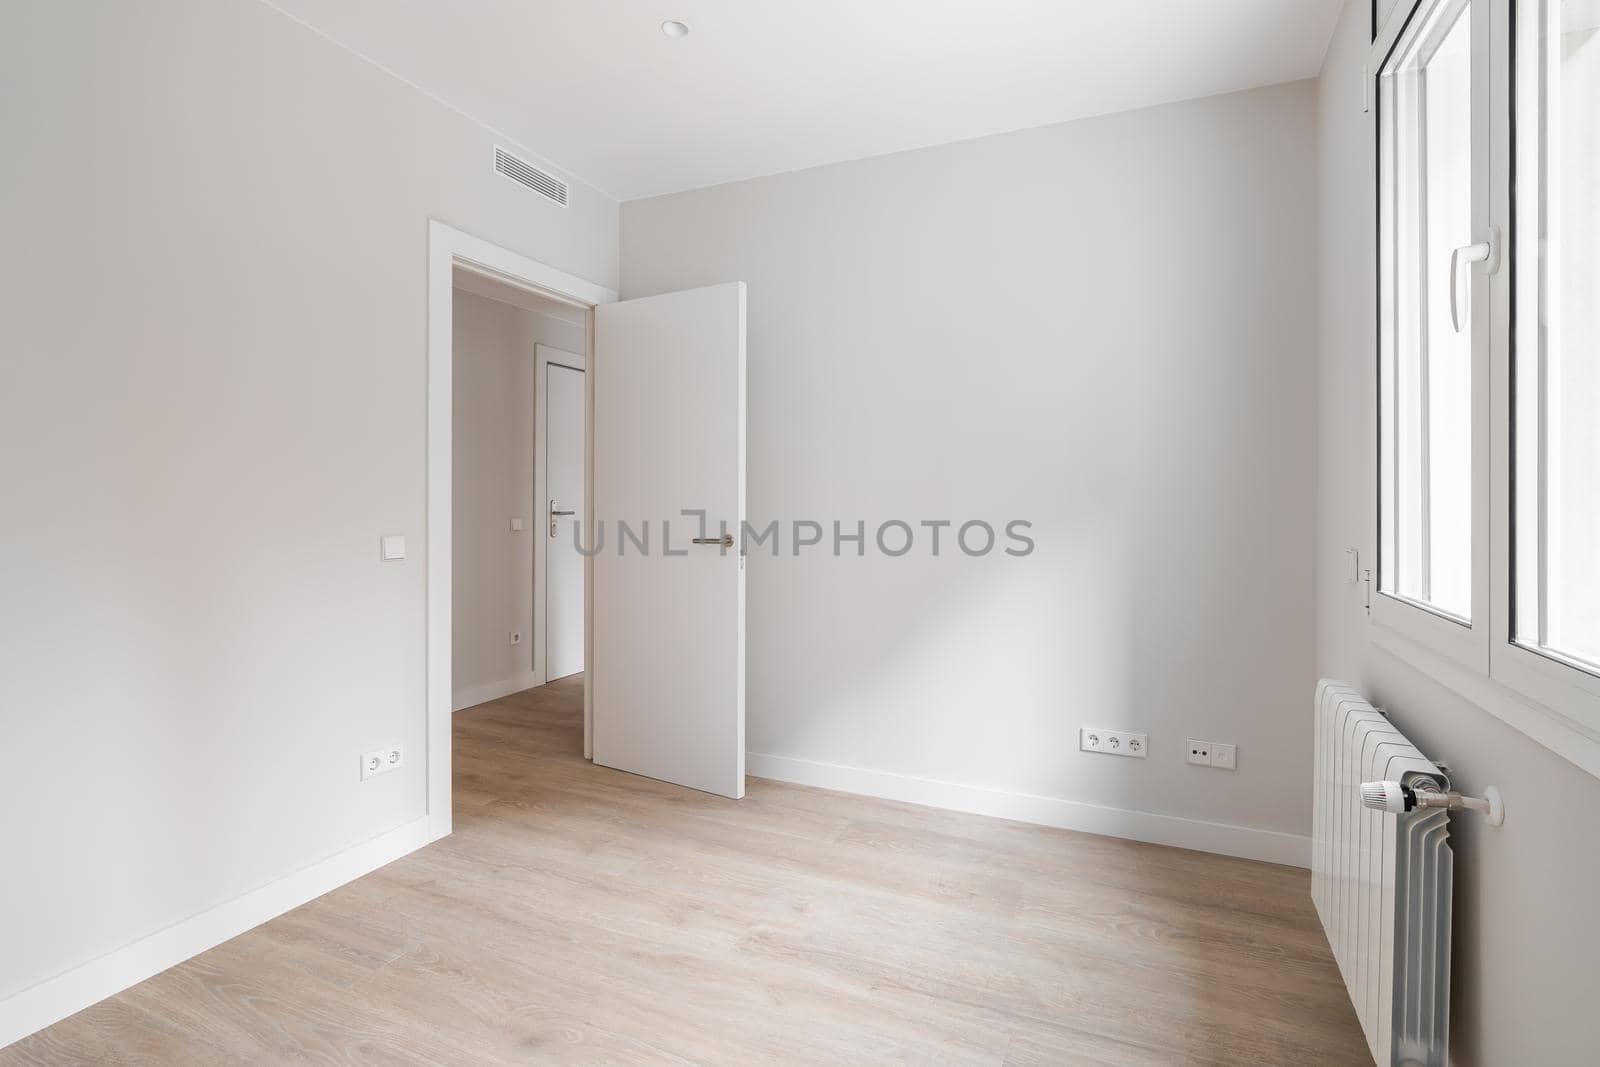 Empty room with door, window, and heating radiator in a white interior house.